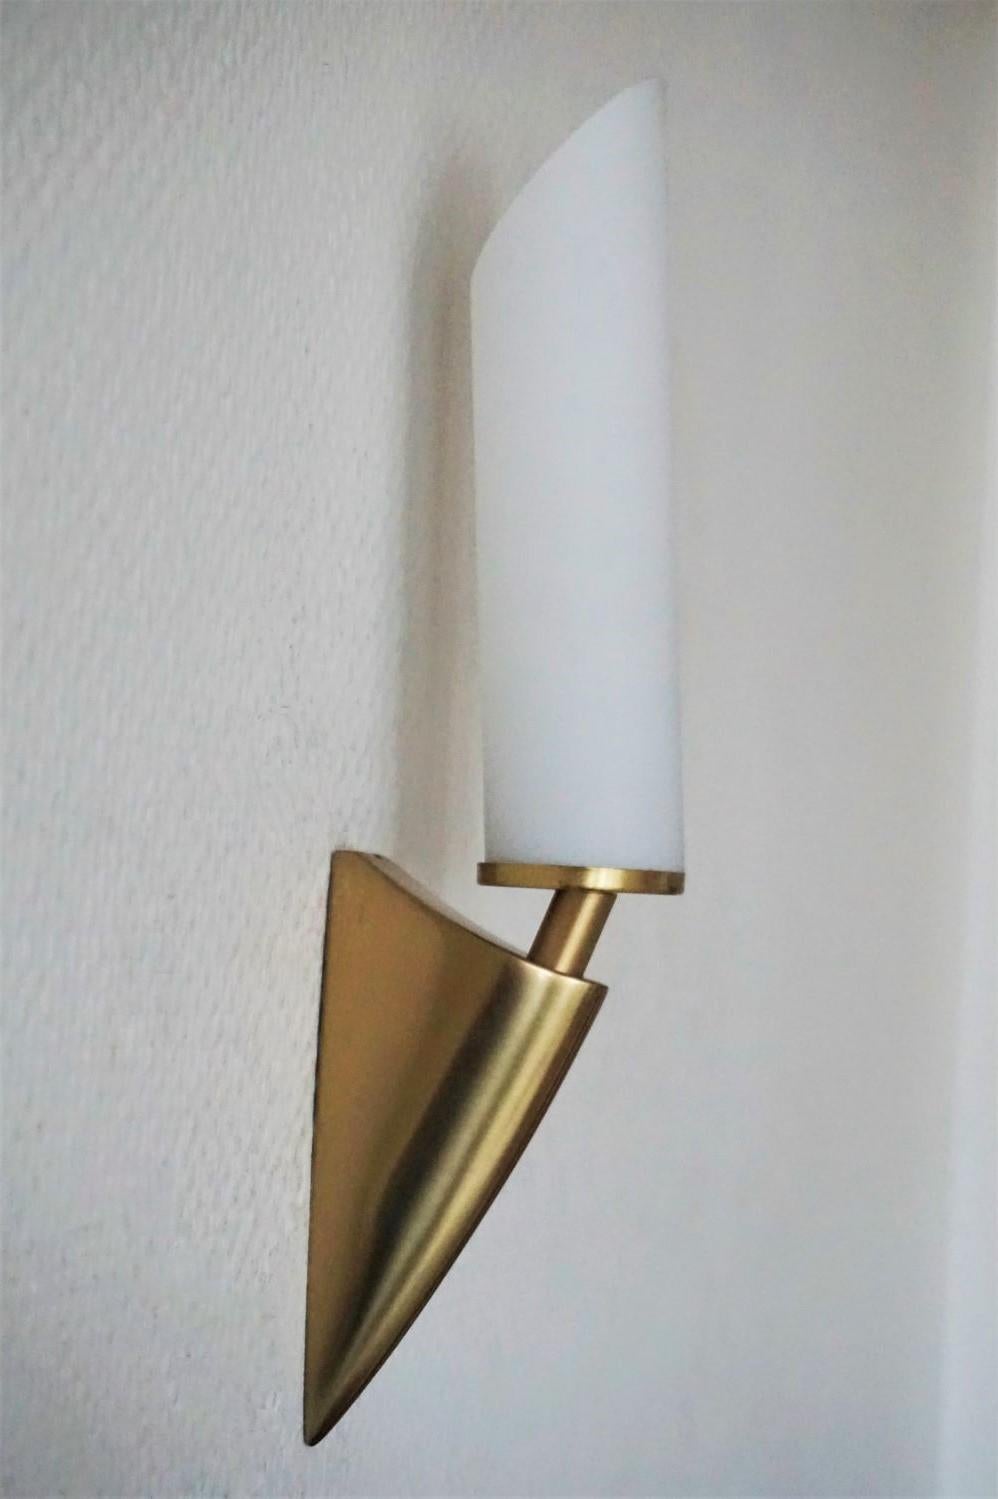 Art Deco Pair of Italian Midcentury Brushed Brass and Satin Glass Wall Sconces, 1950s For Sale